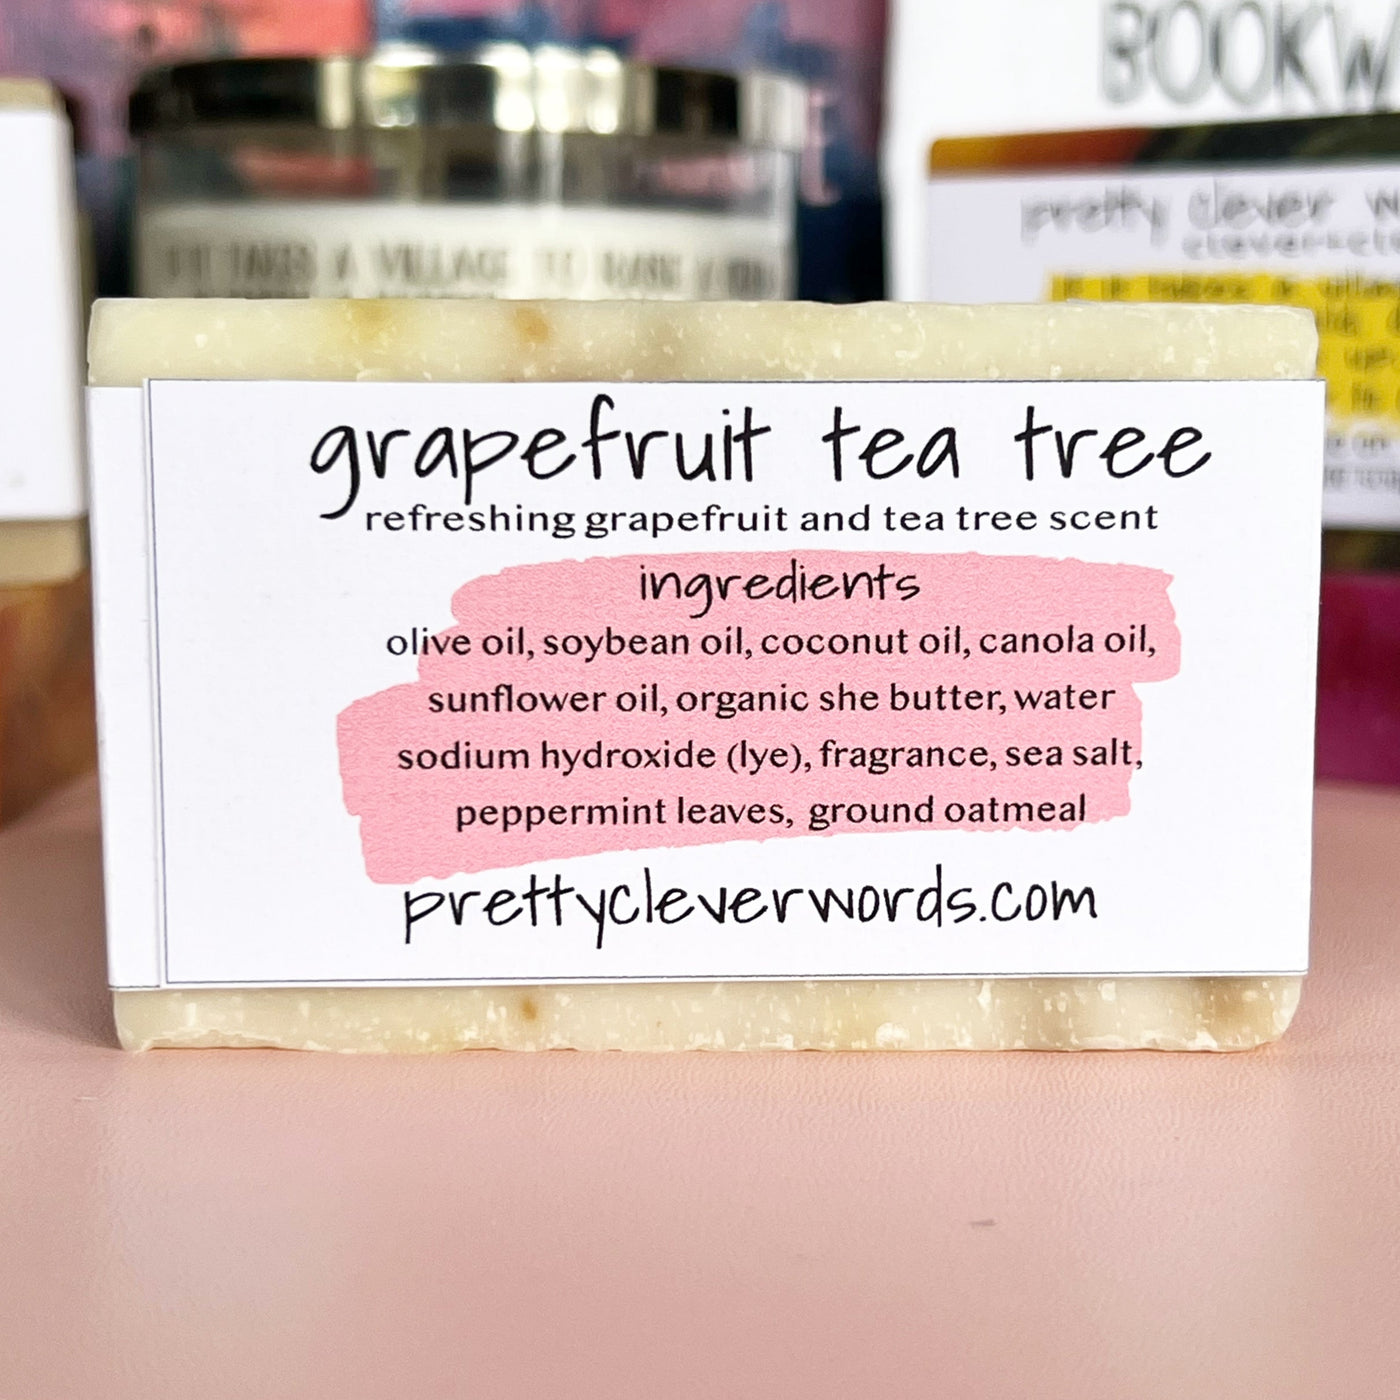 clever+clean grapefruit tea tree bar soap - sounds like a bad idea, what time?